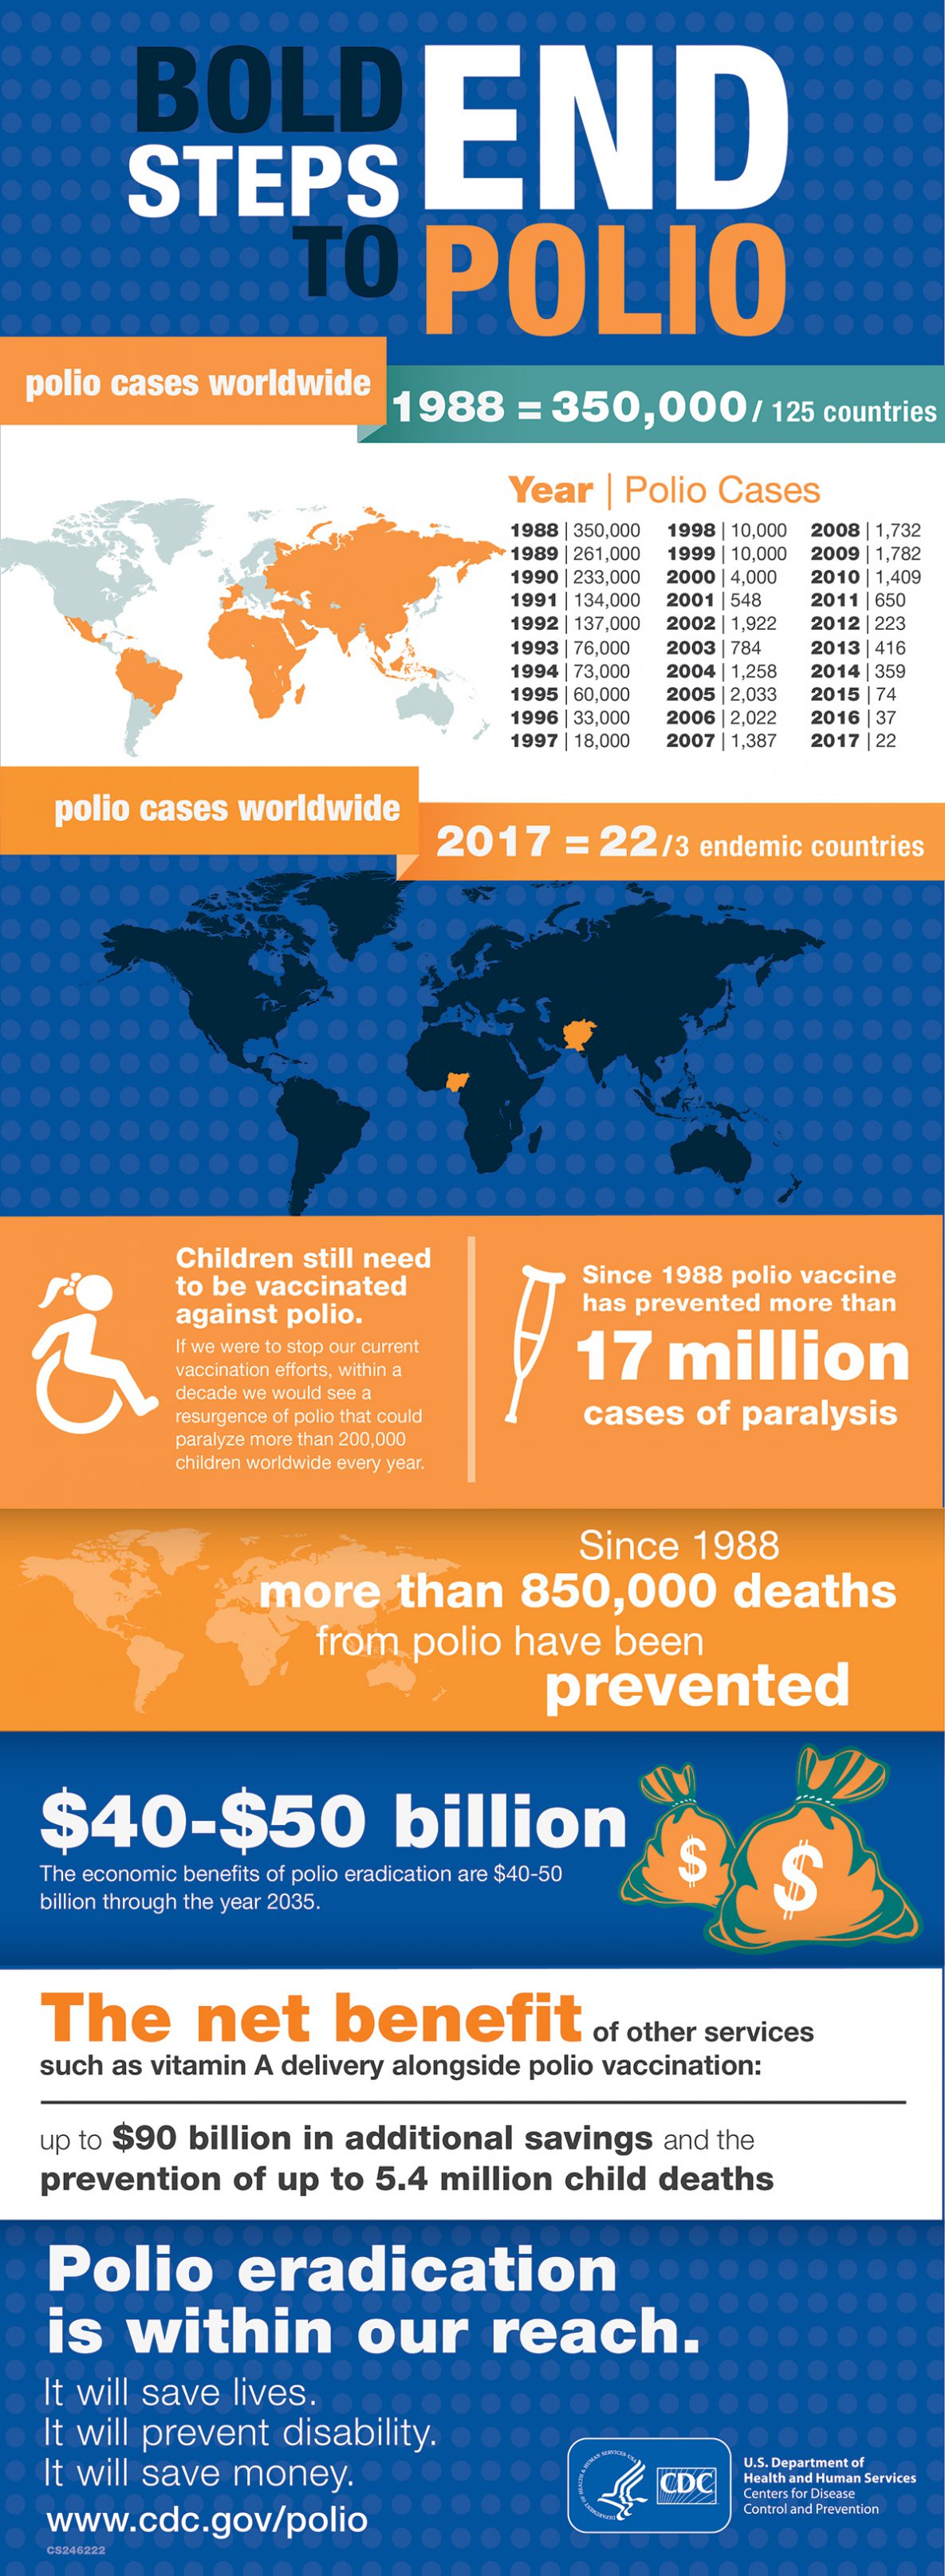 Bold steps to end polio